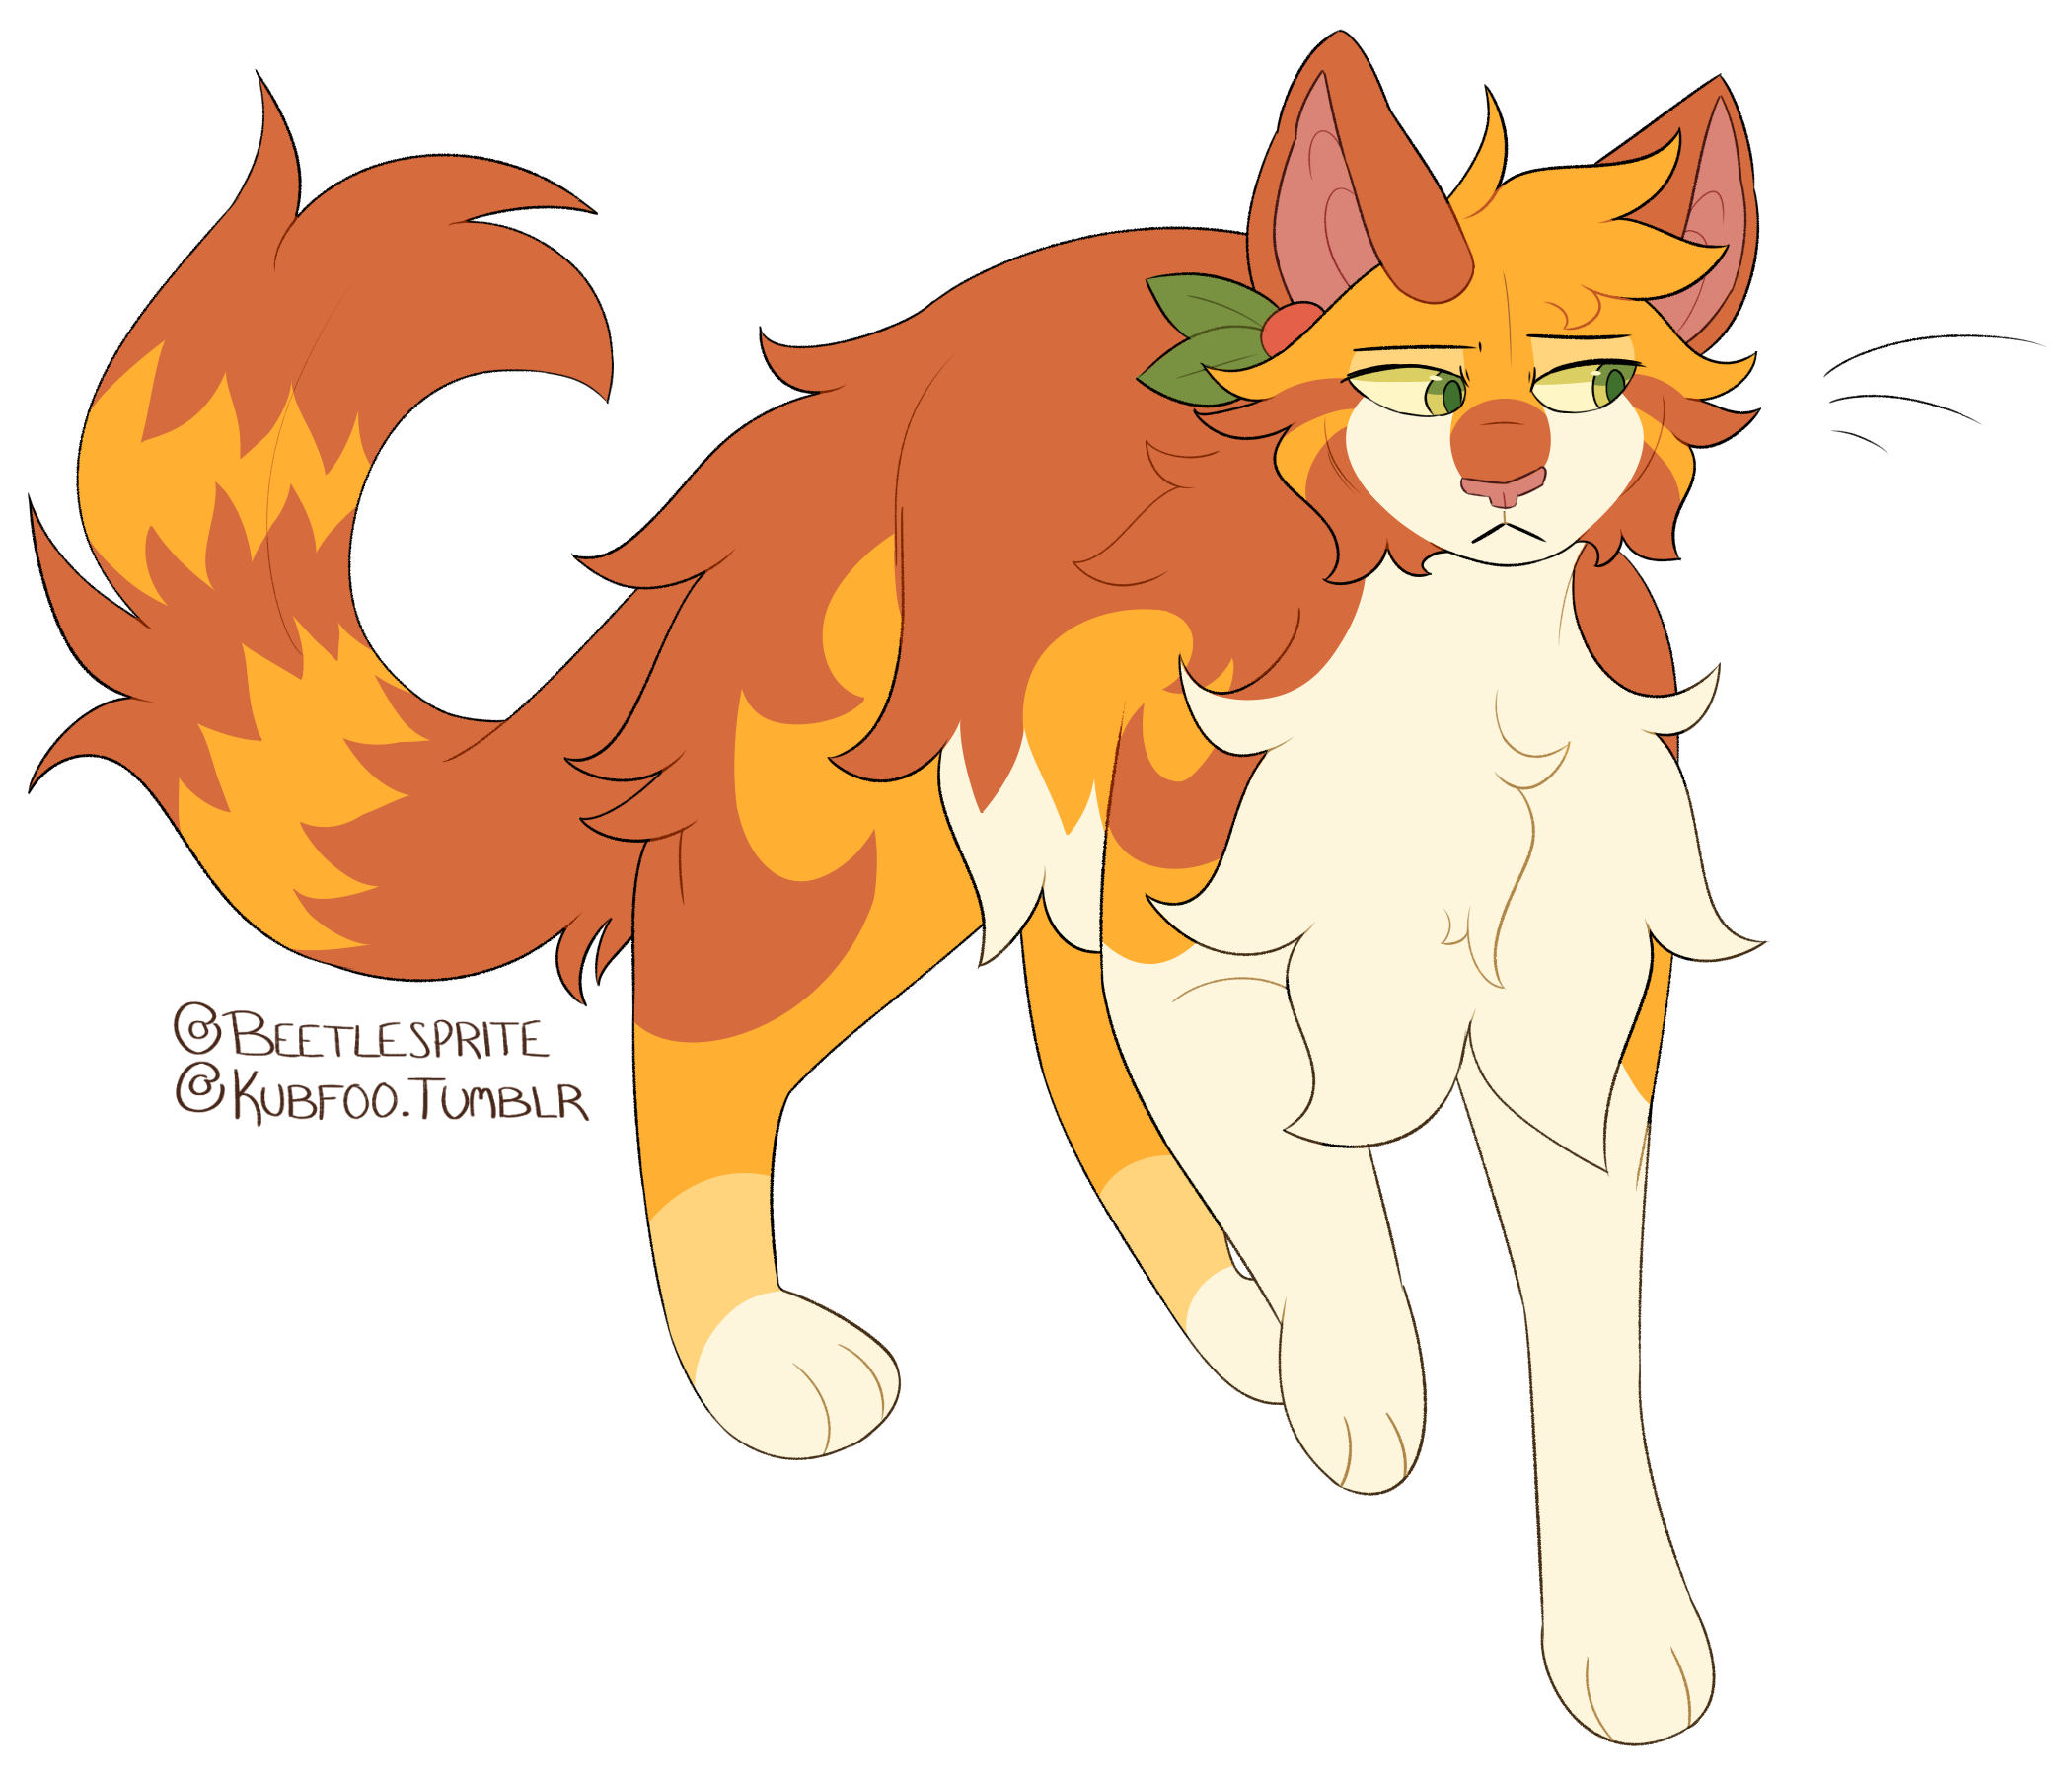 A drawing of Coralsong, an bright yellow cat with bright orange simplified, swirled tabby markings, a cream underbelly, and green eyes. She wears a hawthorn berry behind her ear with the leaves poking out. She is standing and facing the viewer, with her tail waving. She looks troubled.